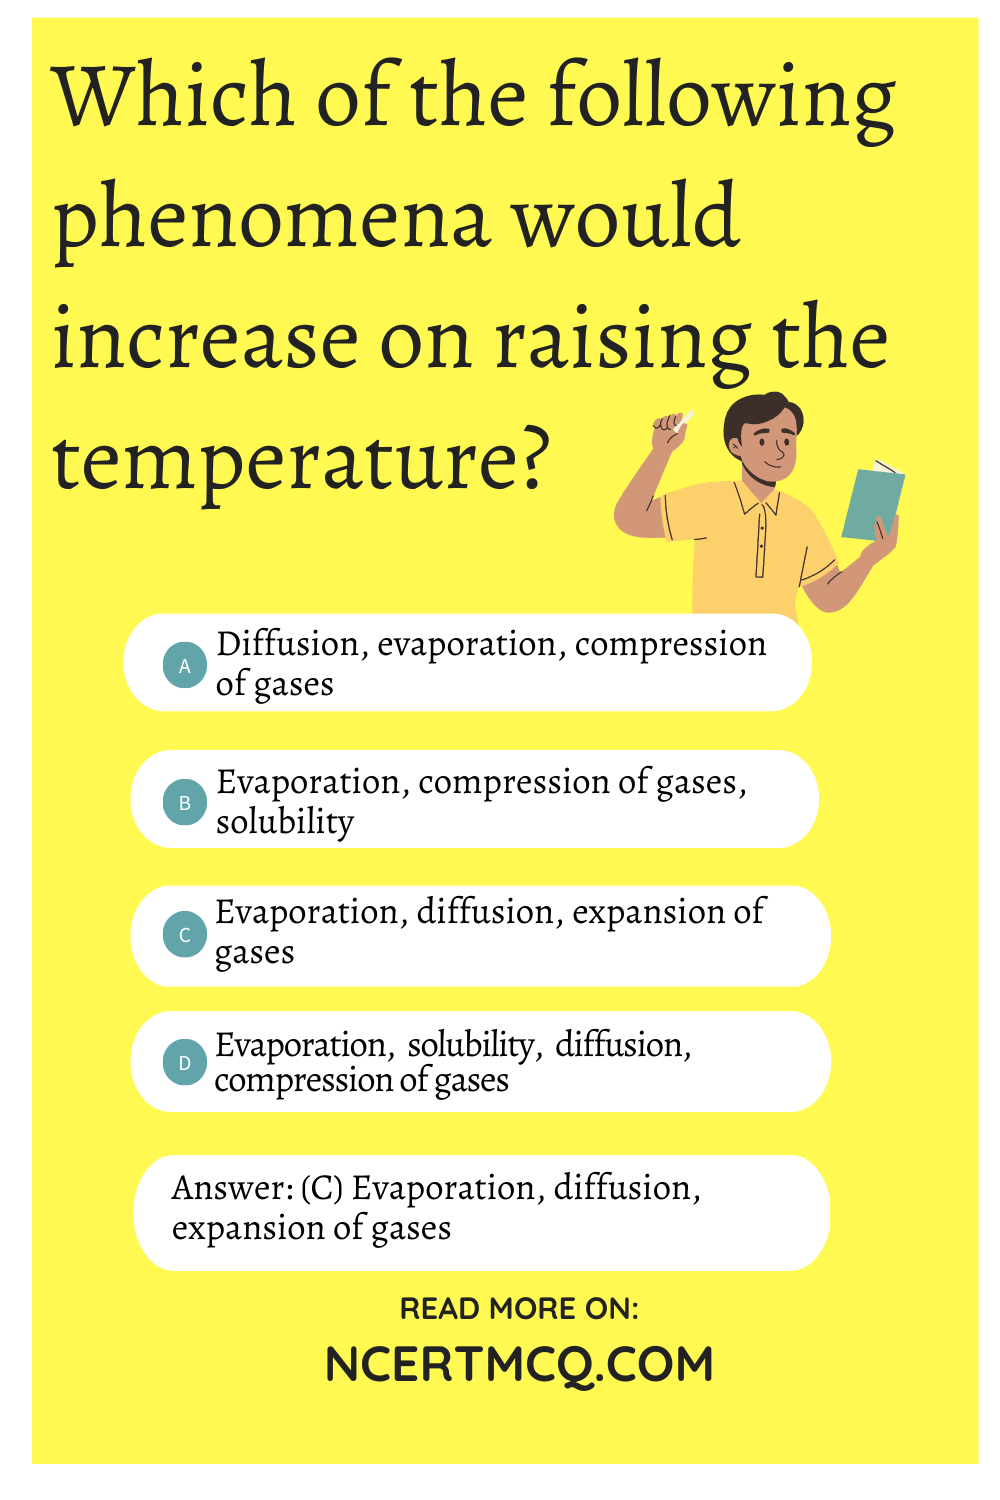 Which of the following phenomena would increase on raising the temperature?